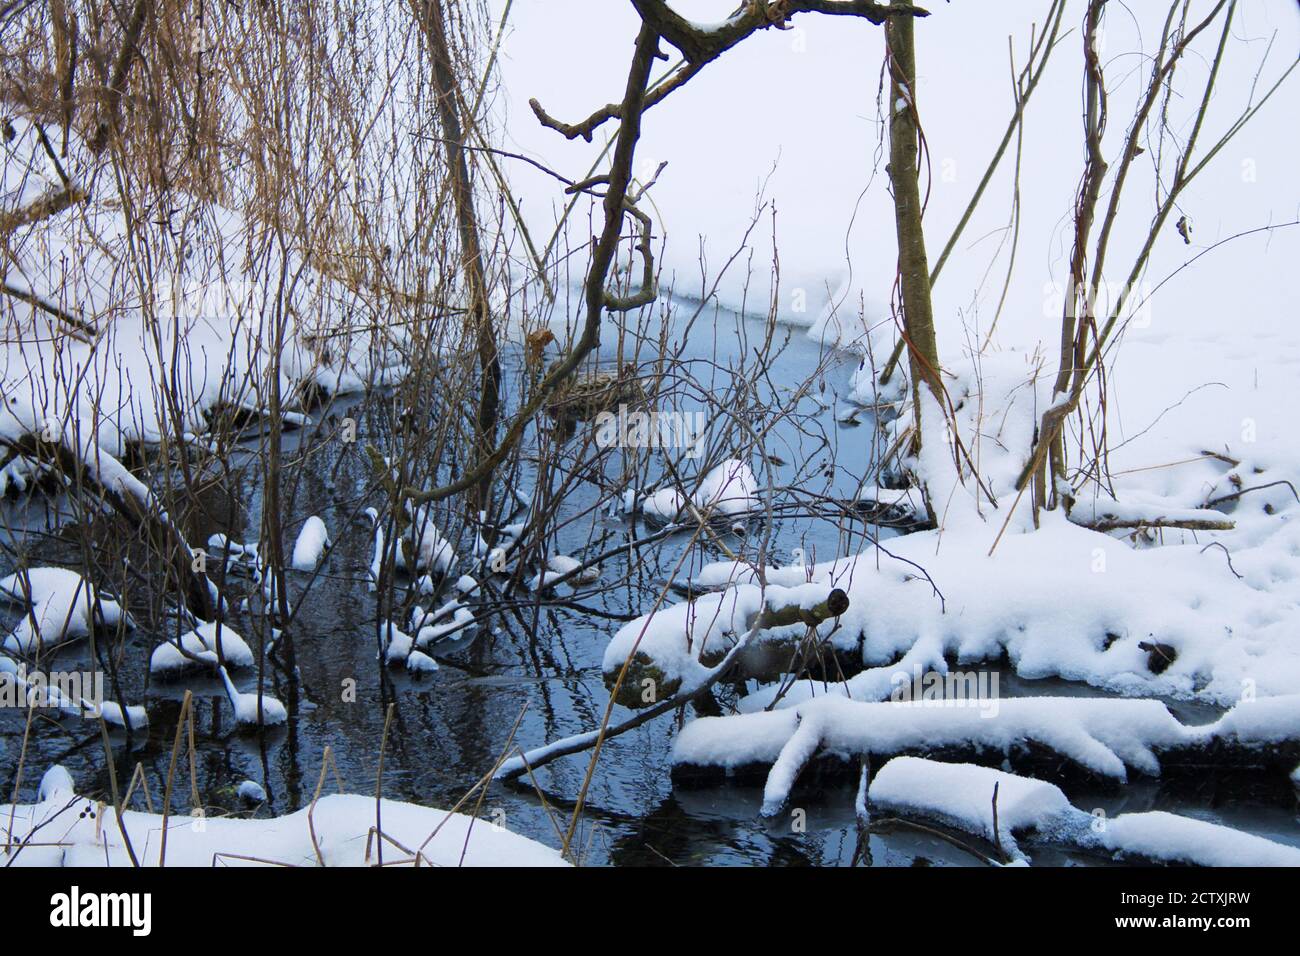 A blue creek spring wellspring in a cold snowy winter day in forest. The wild duck hides behind the branches. Beautiful winter landscape Stock Photo